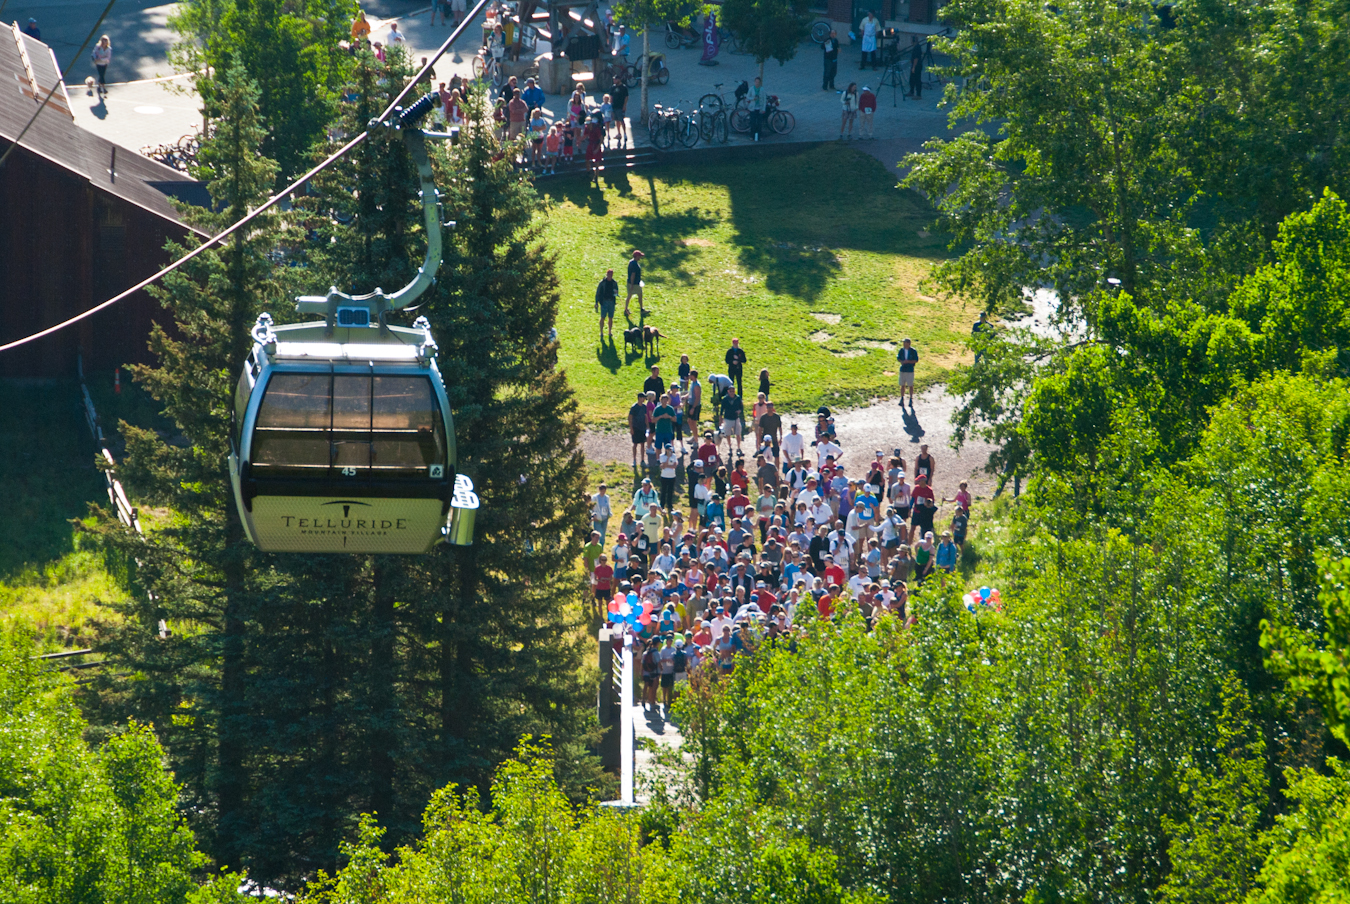 A gondola going up as people watch from the ground in Telluride Colorado